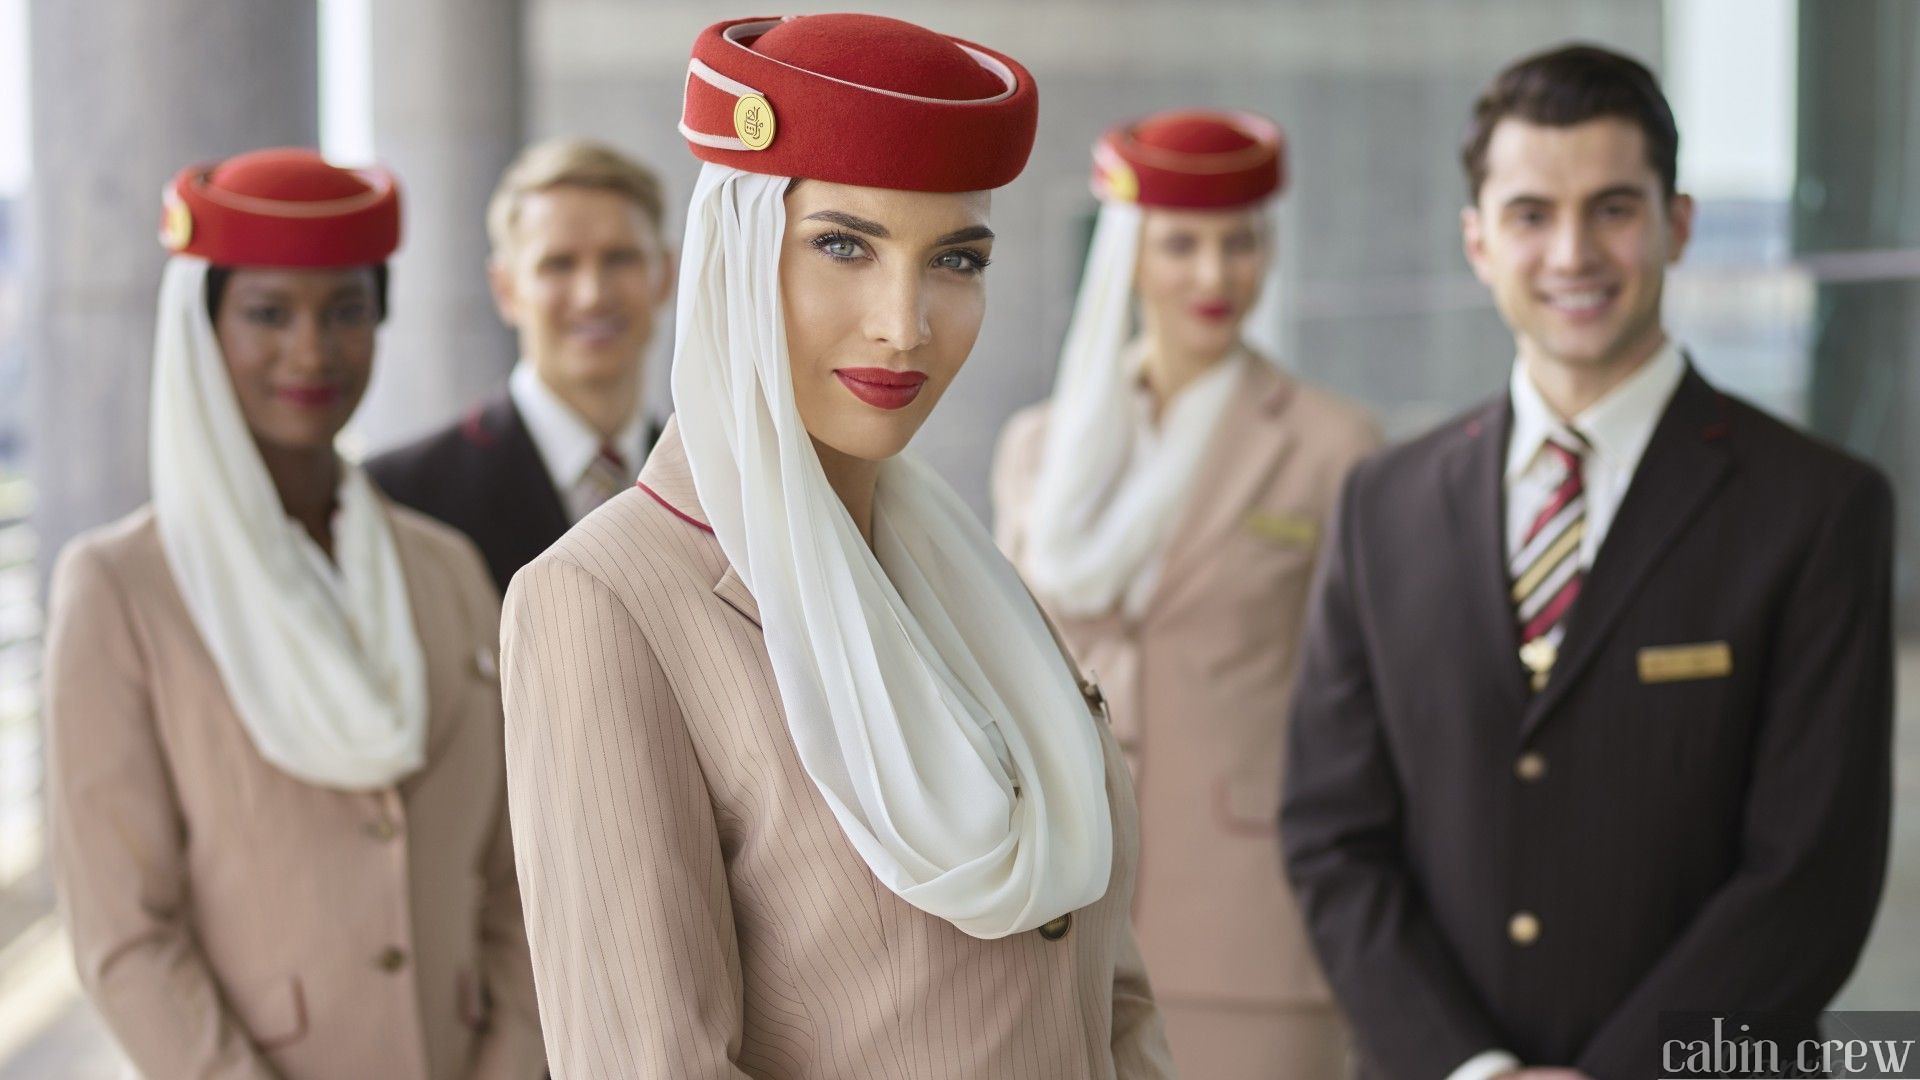 Being a cabin crew member for Emirates is a highly